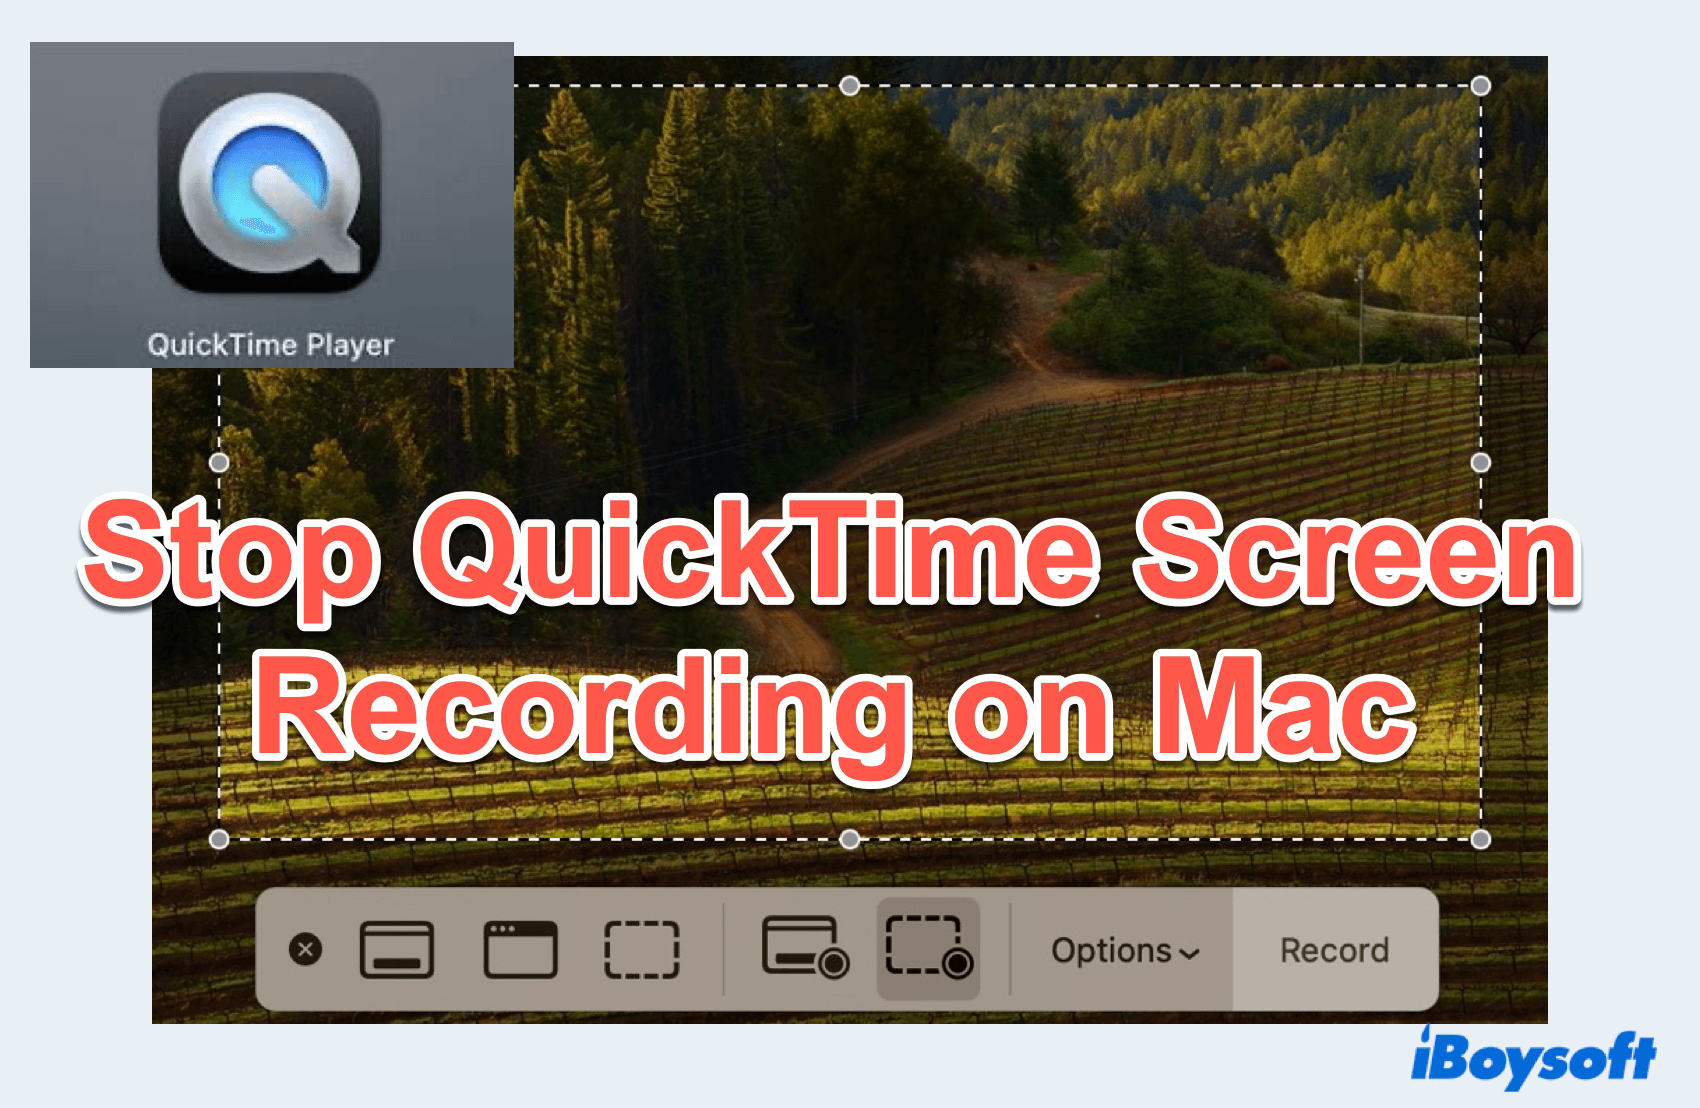 How to Stop QuickTime Screen Recording on Mac?